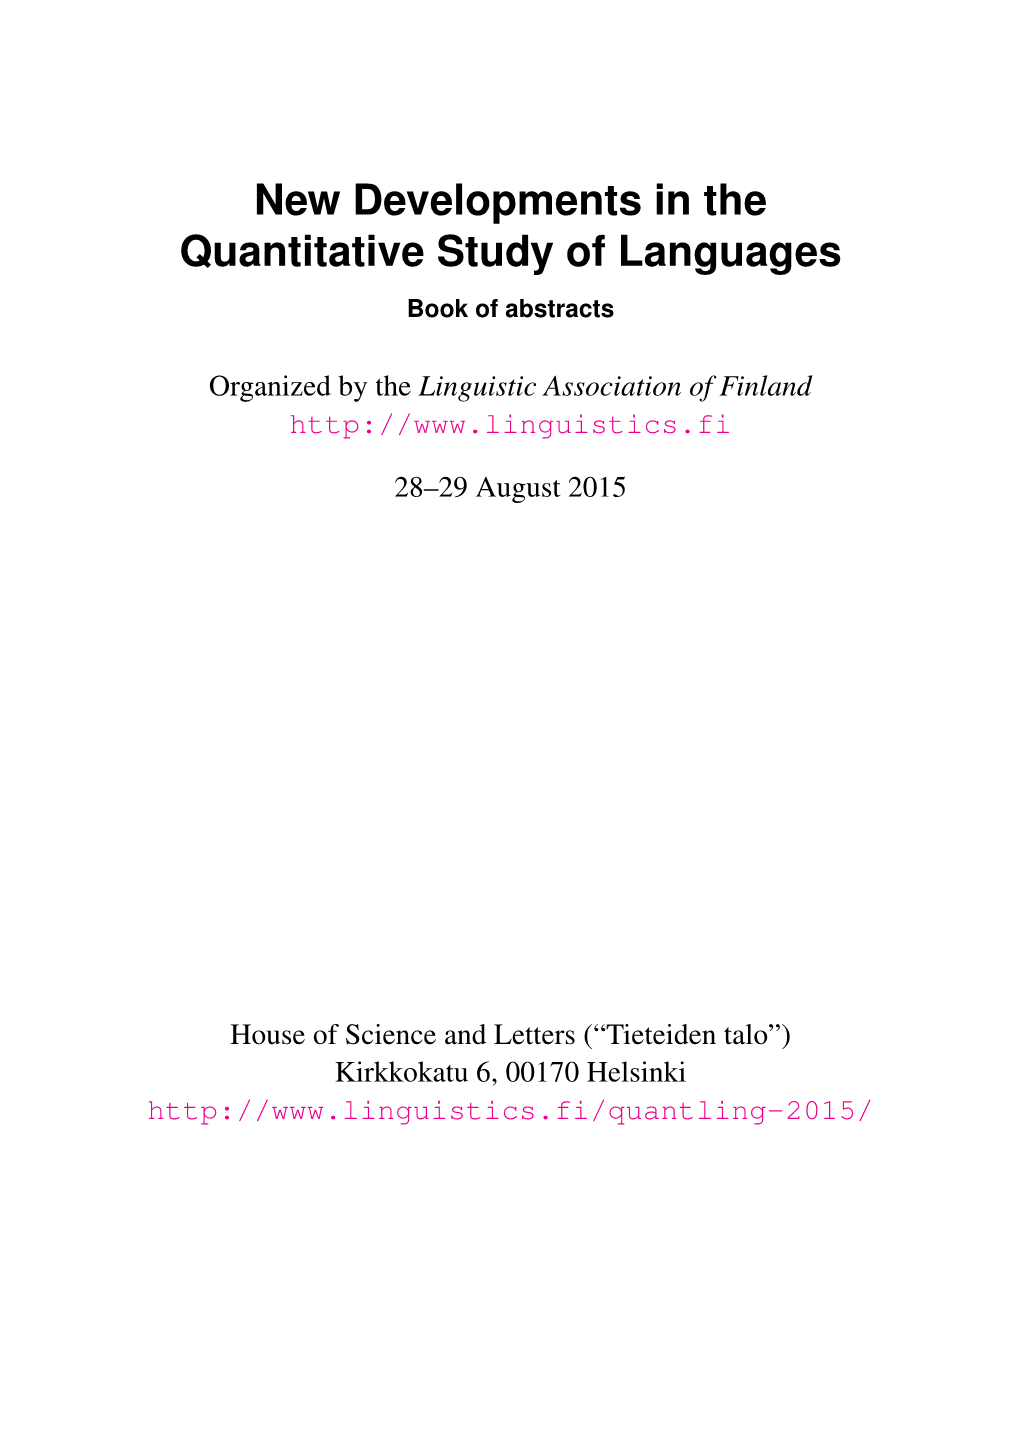 New Developments in the Quantitative Study of Languages Book of Abstracts